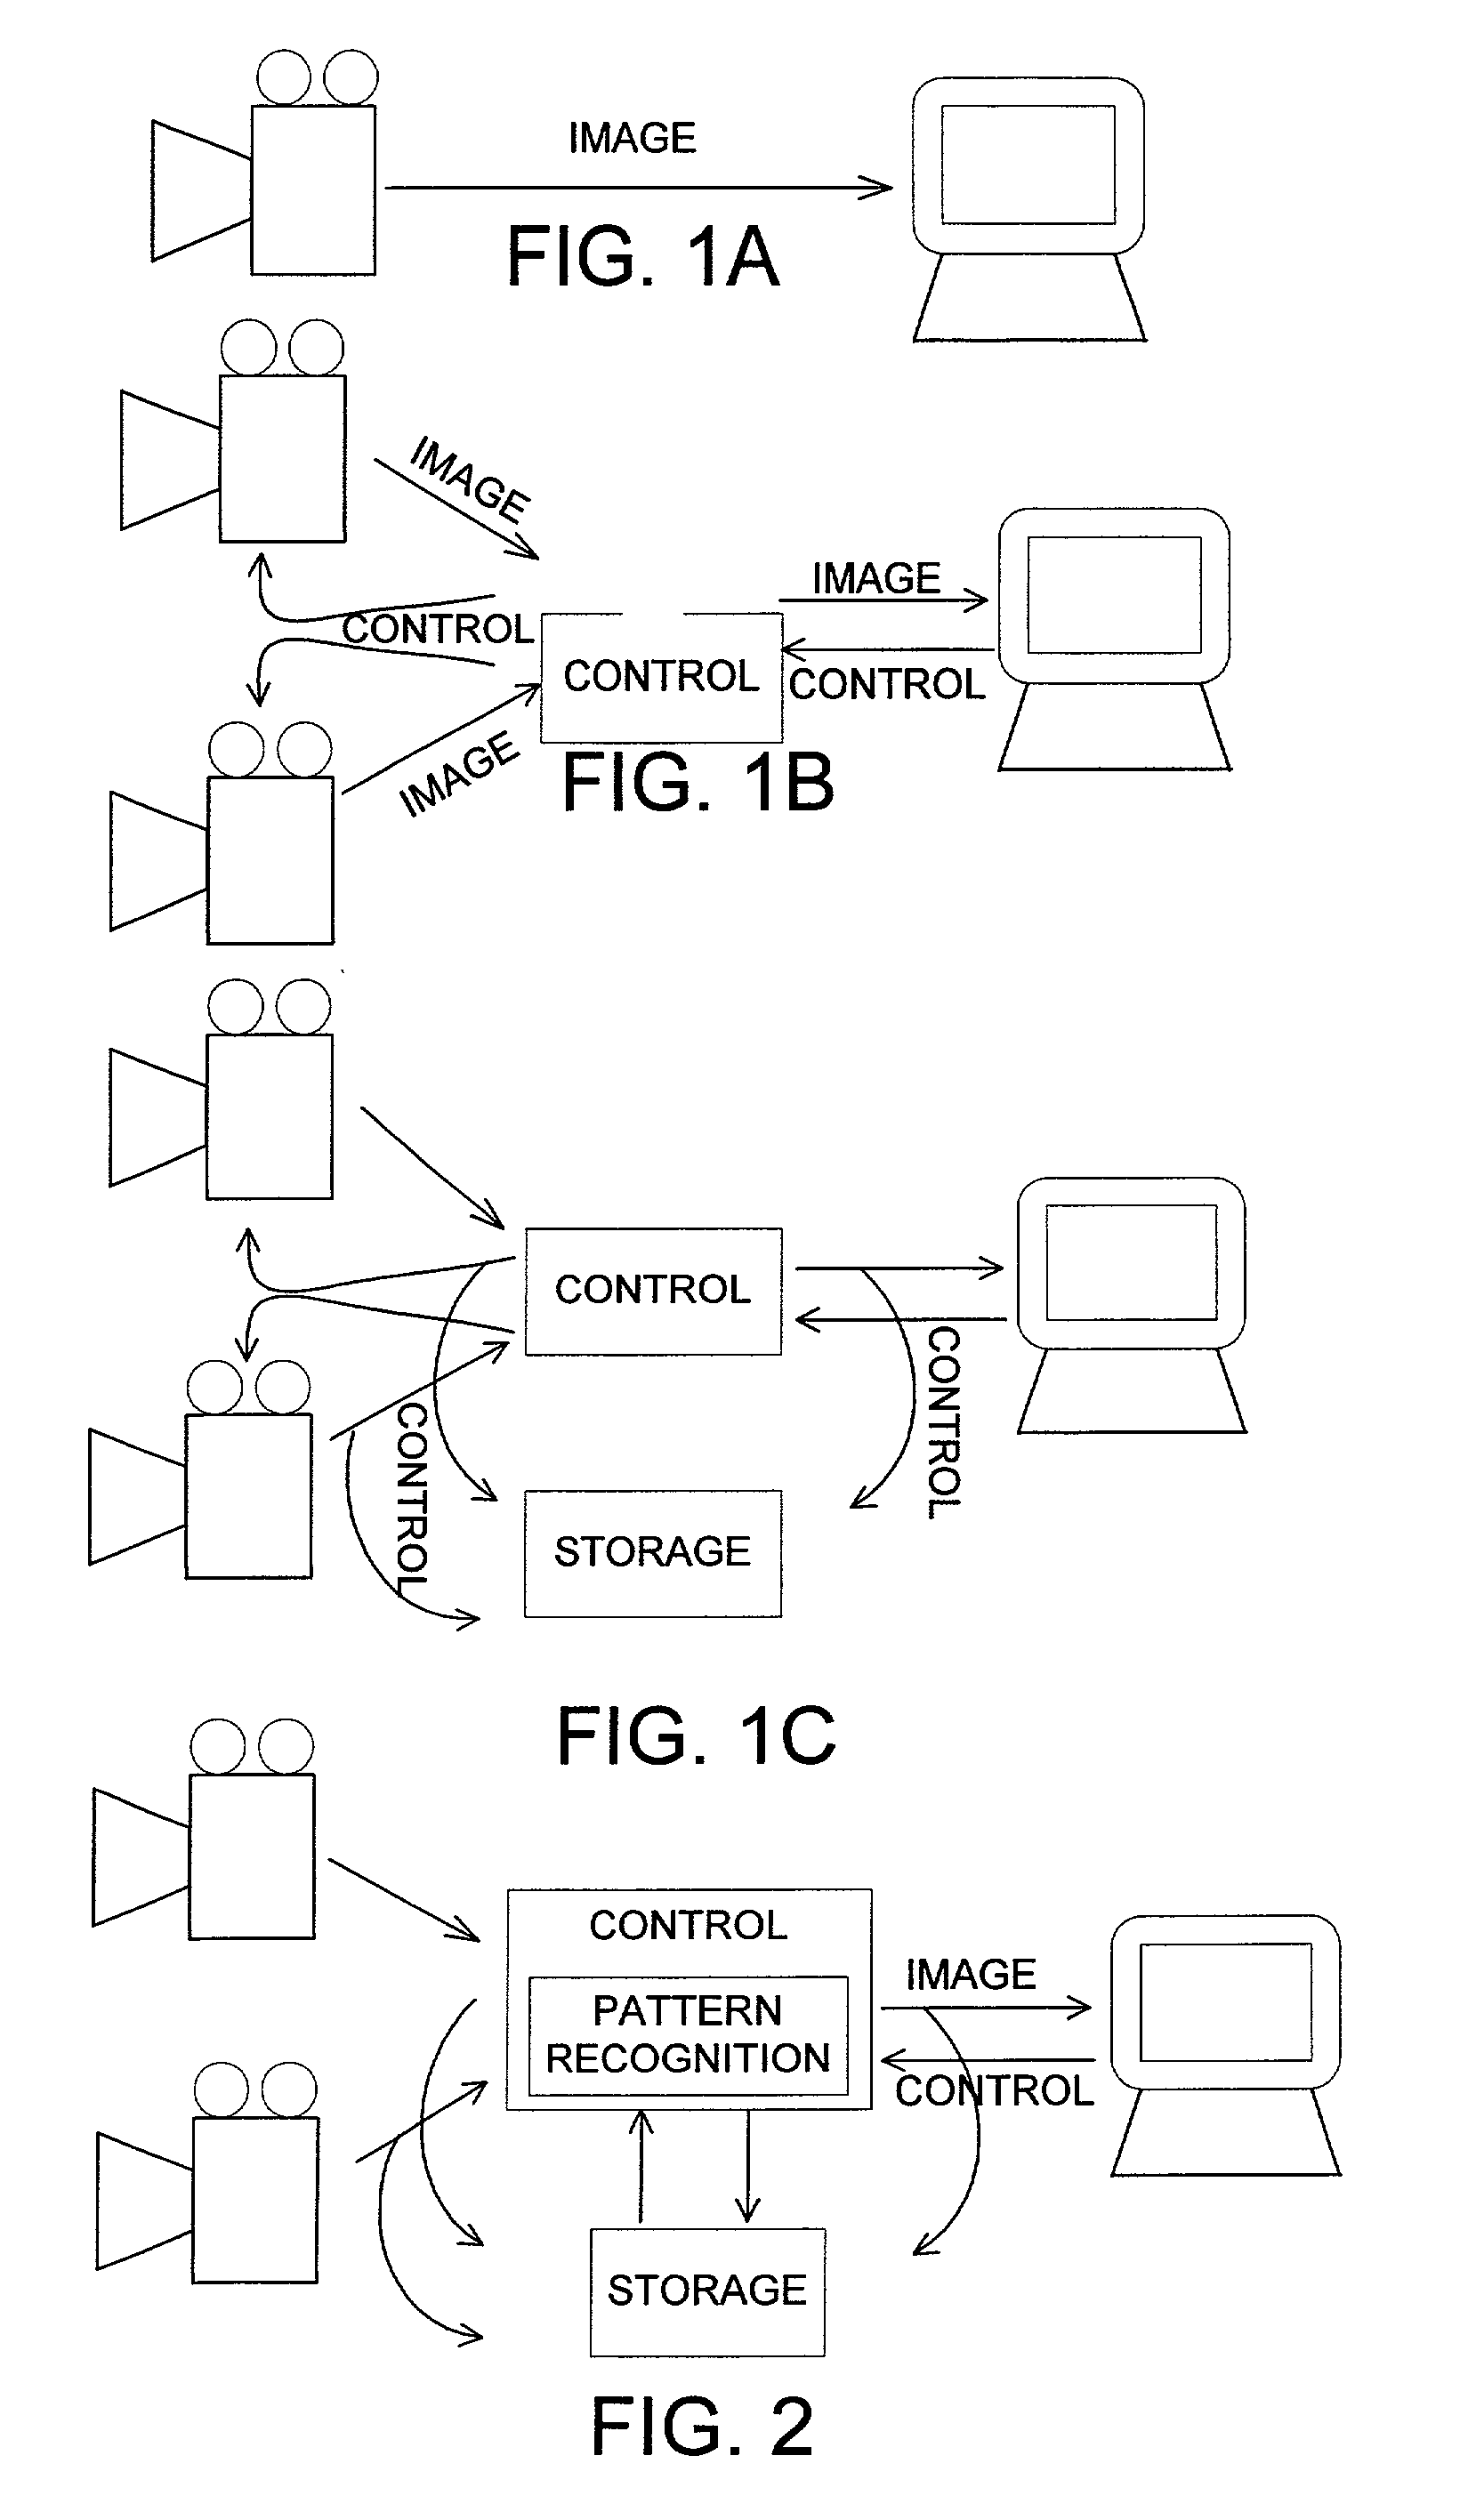 System and method for generating alert conditions in a surveillance system